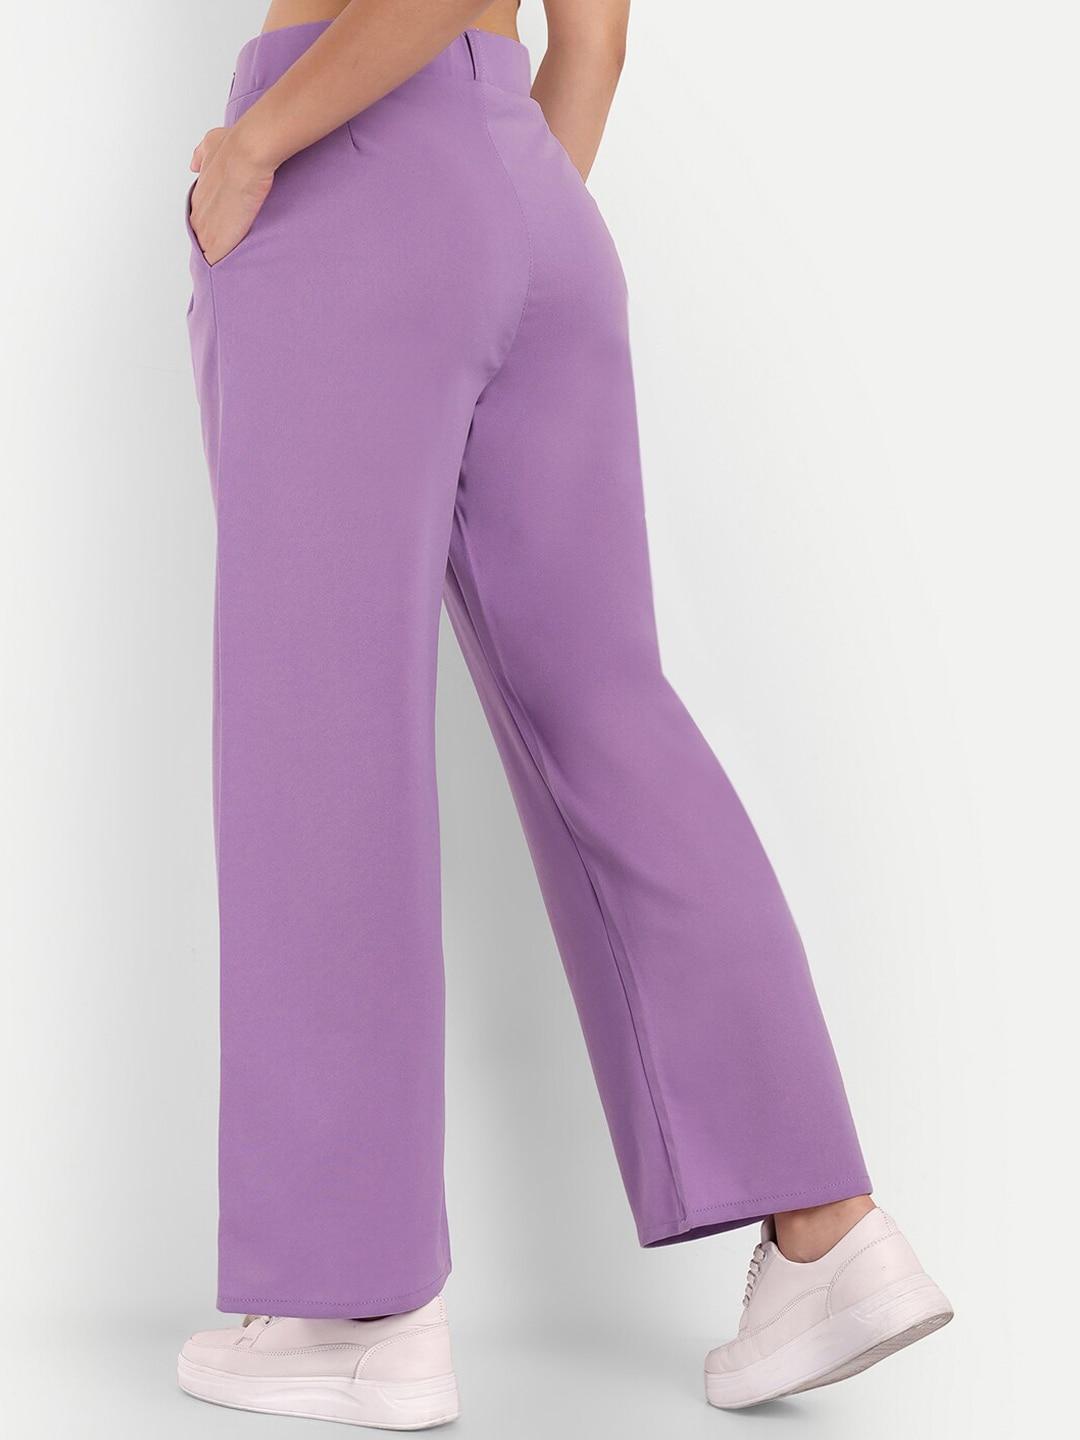 Next One Women Smart Loose Fit High-Rise Parallel Trousers